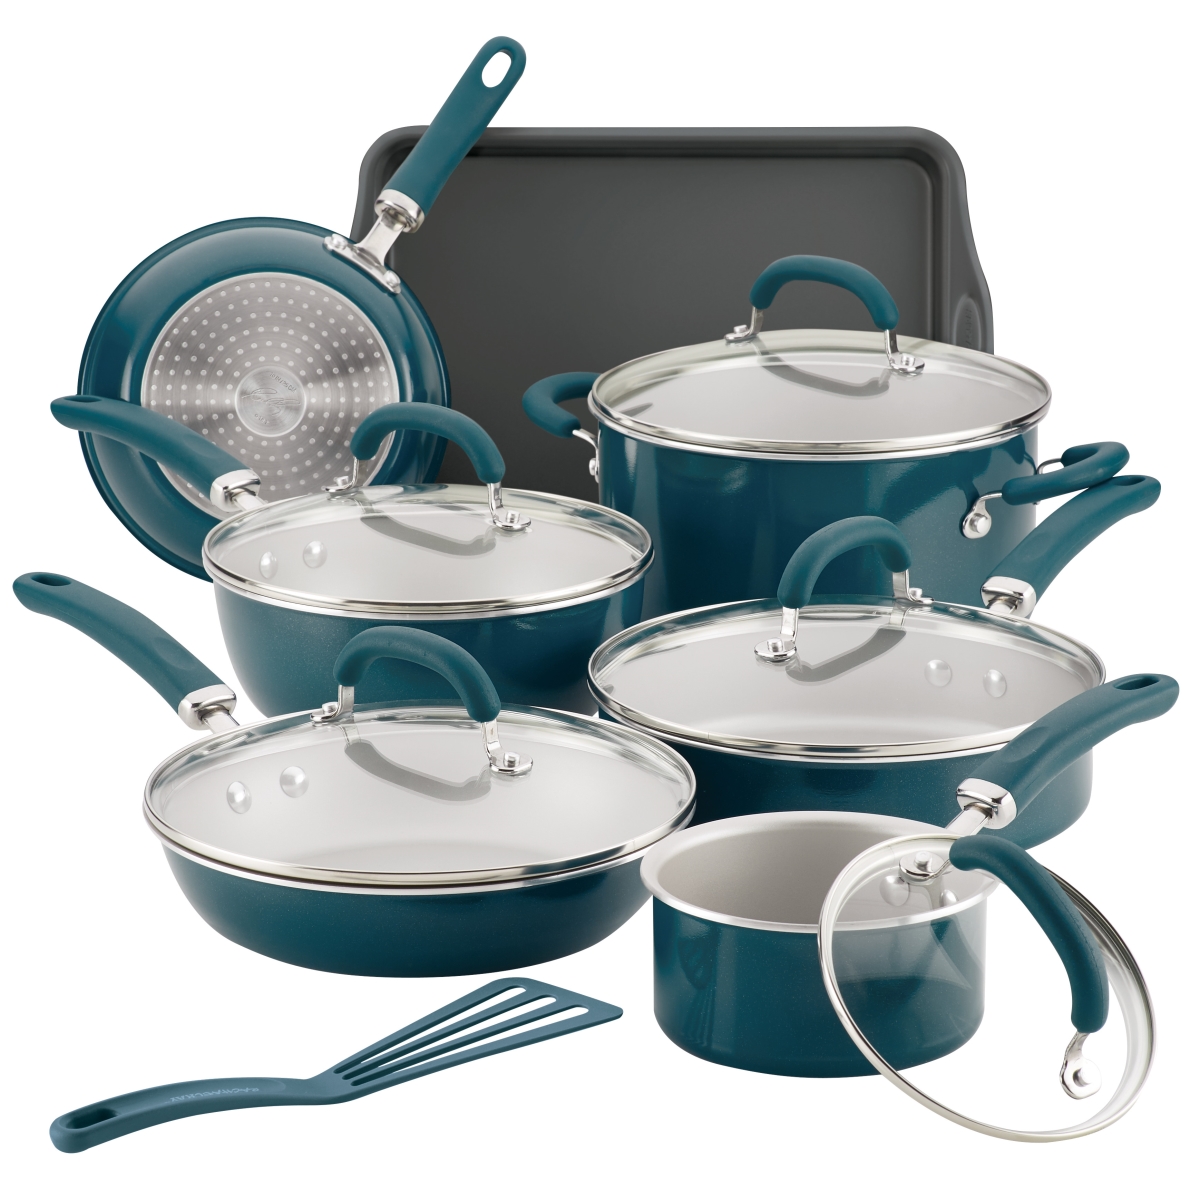 Picture of Rachael Ray 12144 Create Delicious Aluminum Nonstick Cookware Set, 13 Piece - Teal Shimmer